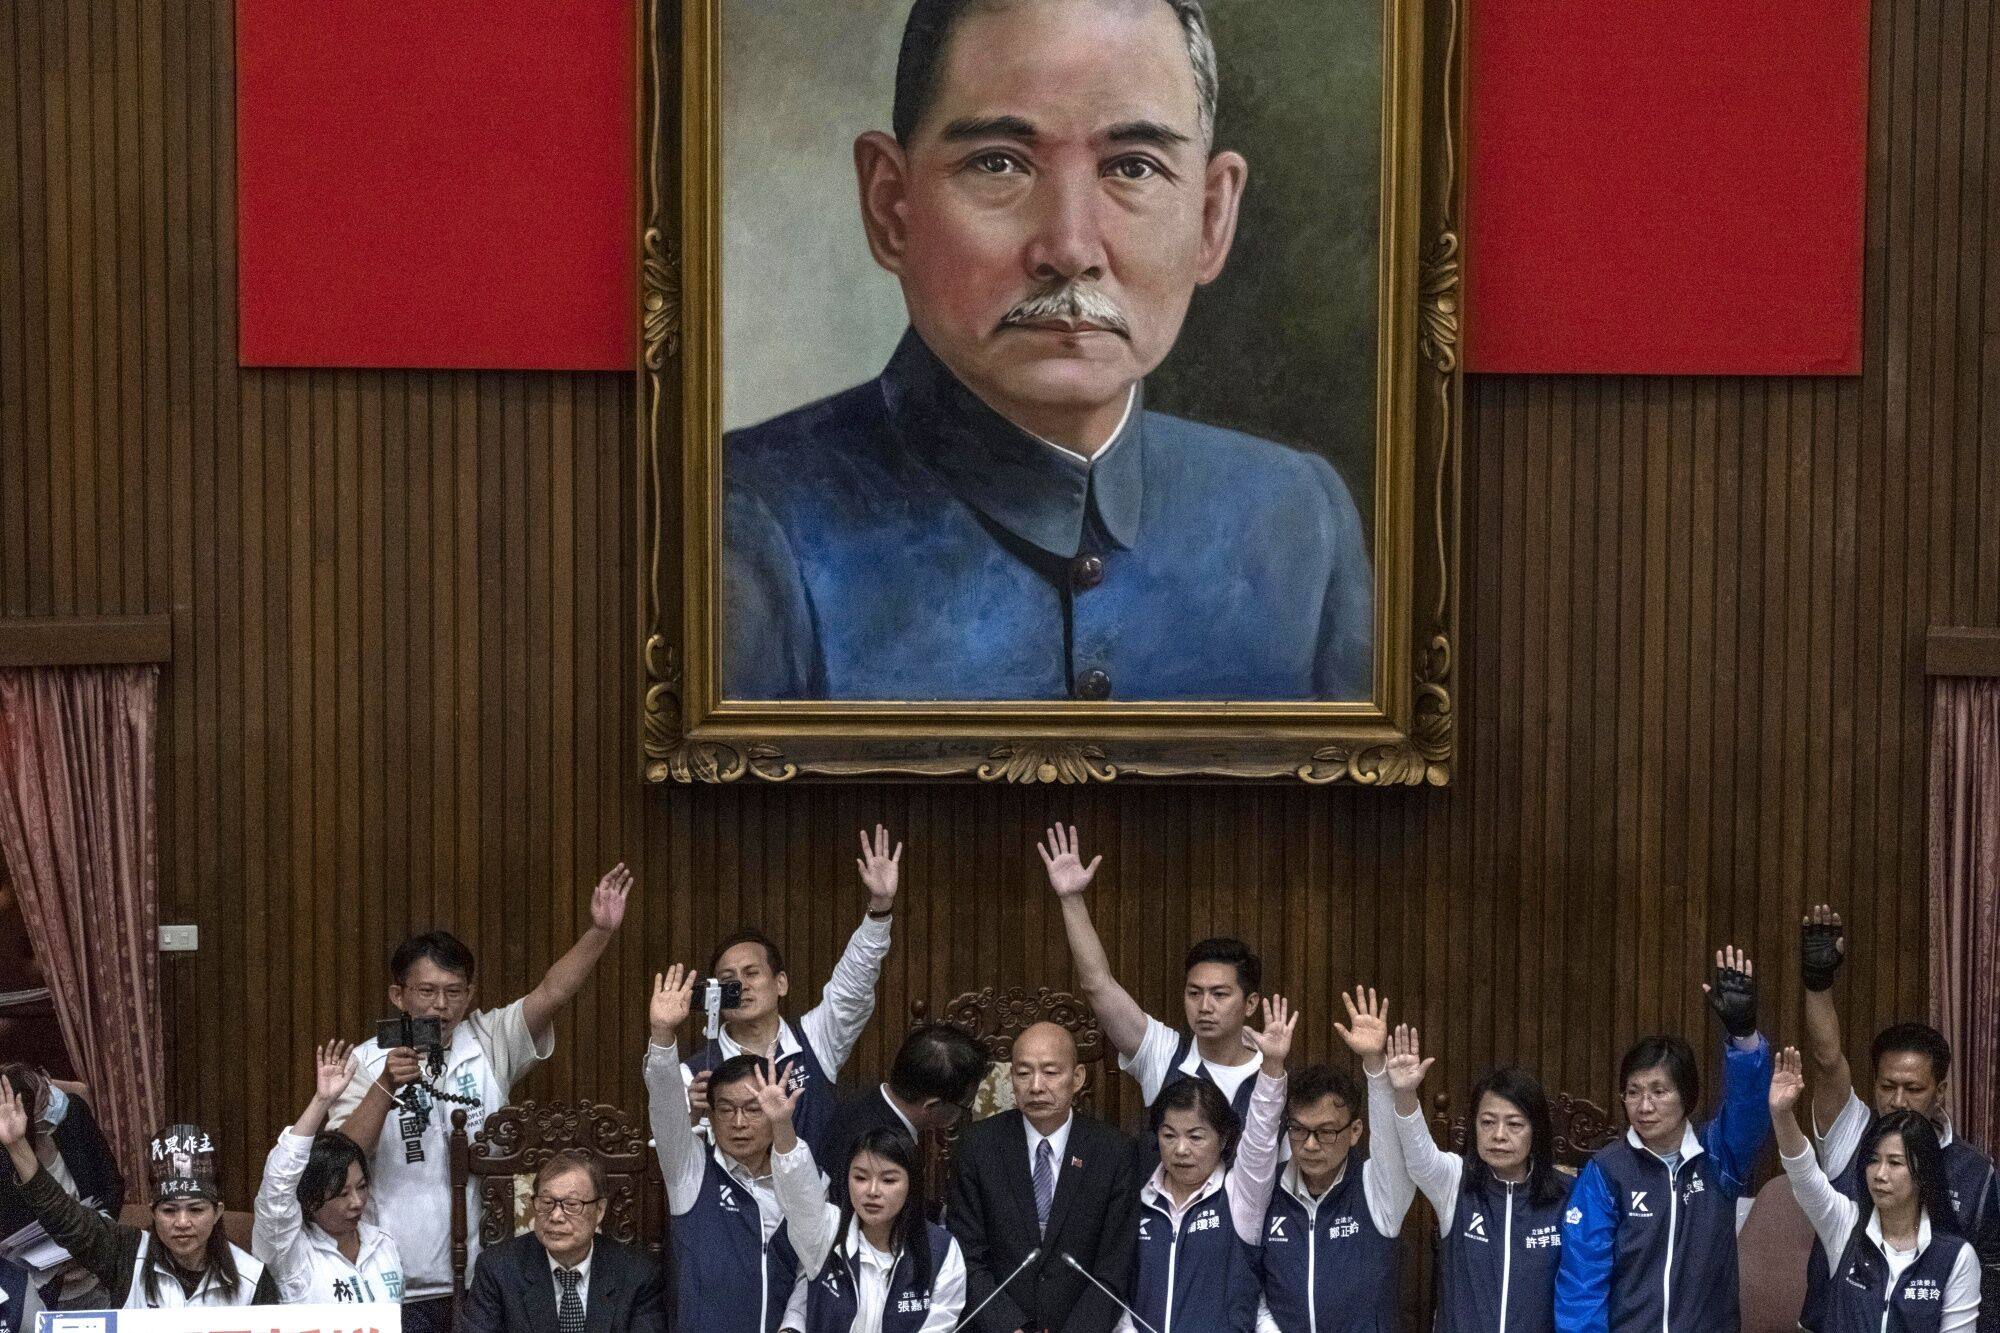 KMT lawmakers gather around the speaker during a protest by their DPP counterparts in the Taiwanese legislature on Tuesday, the day after William Lai’s inauguration. Photo: Bloomberg